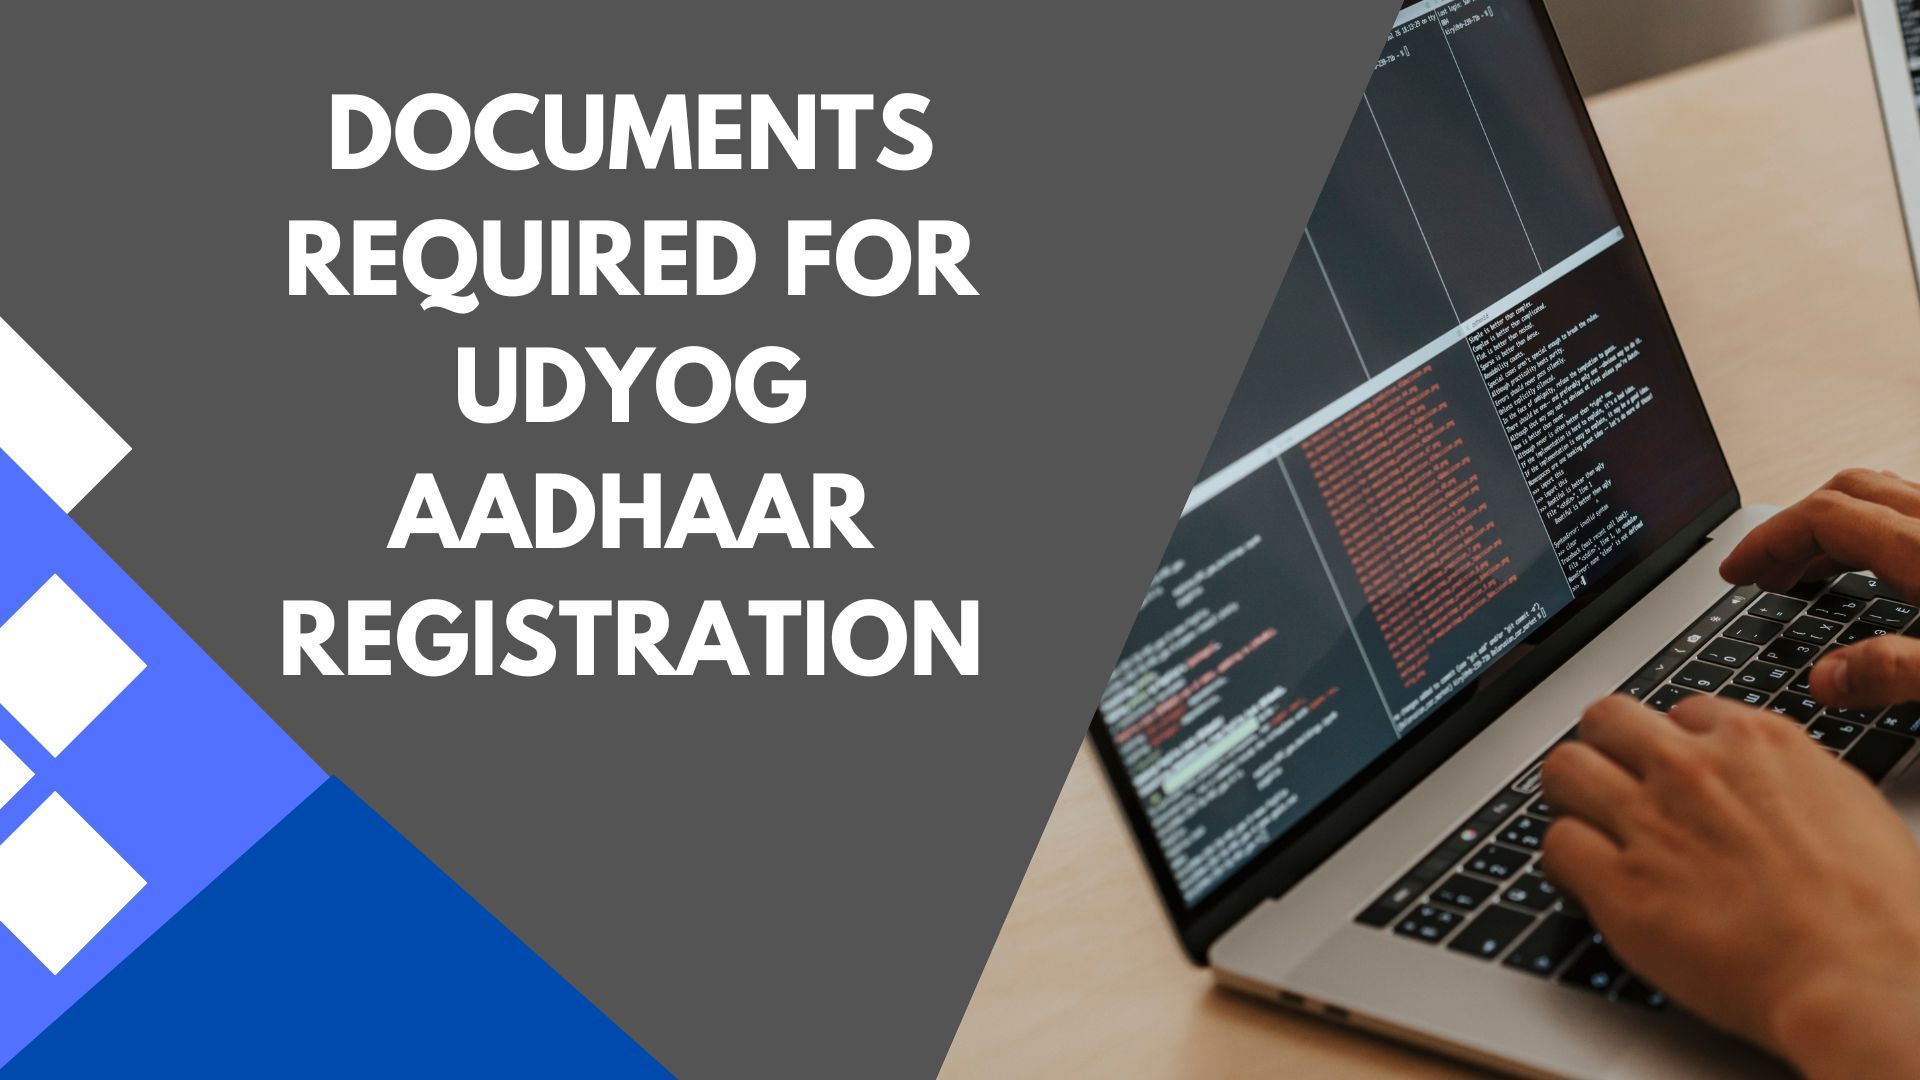 Documents Required for Udyog Aadhaar Registration